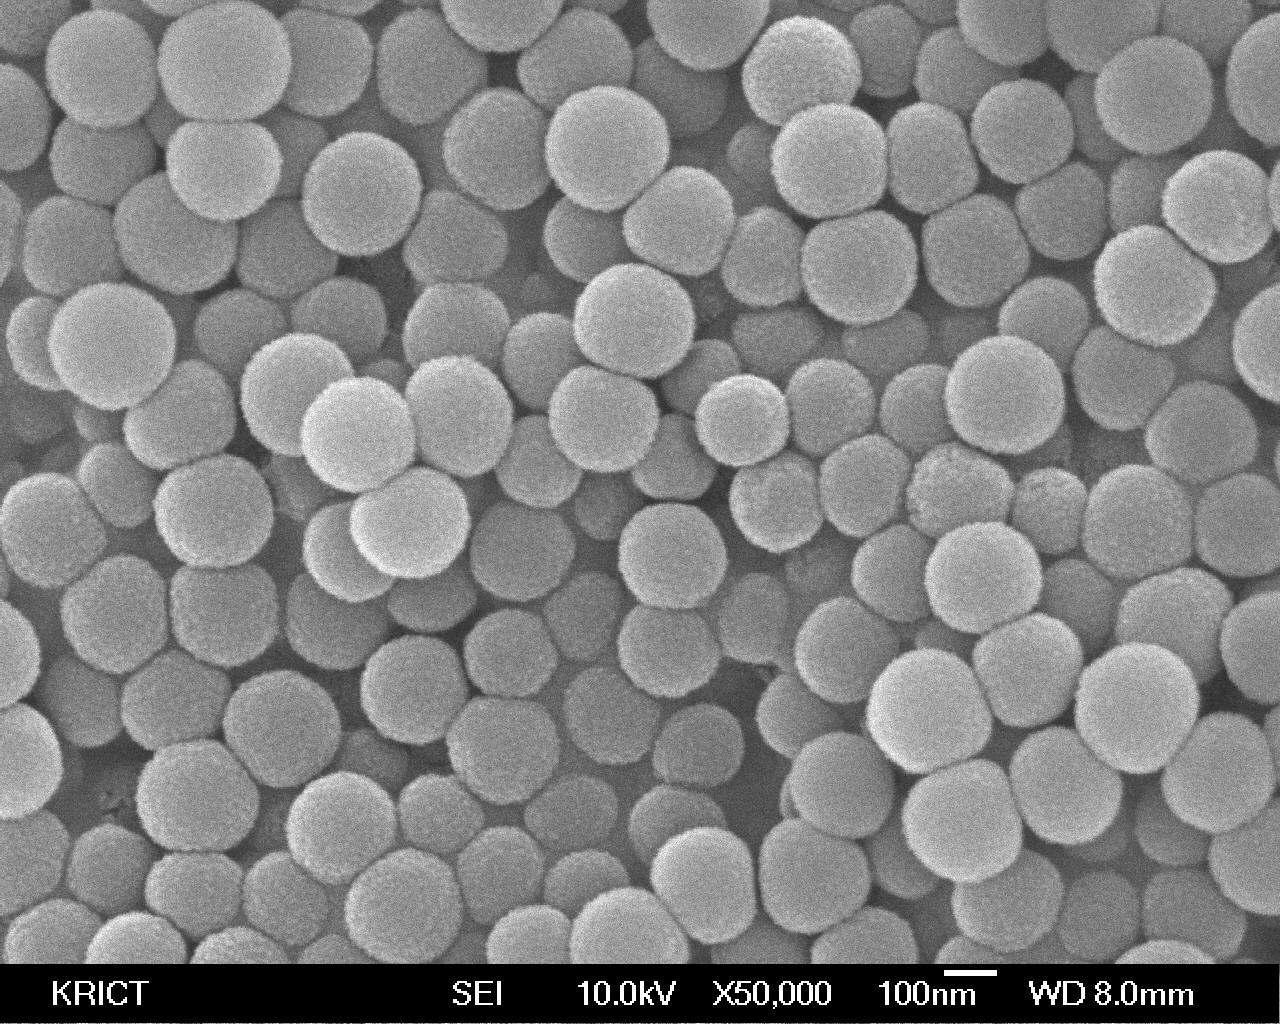 SEM images of the colloidal silica xerogels